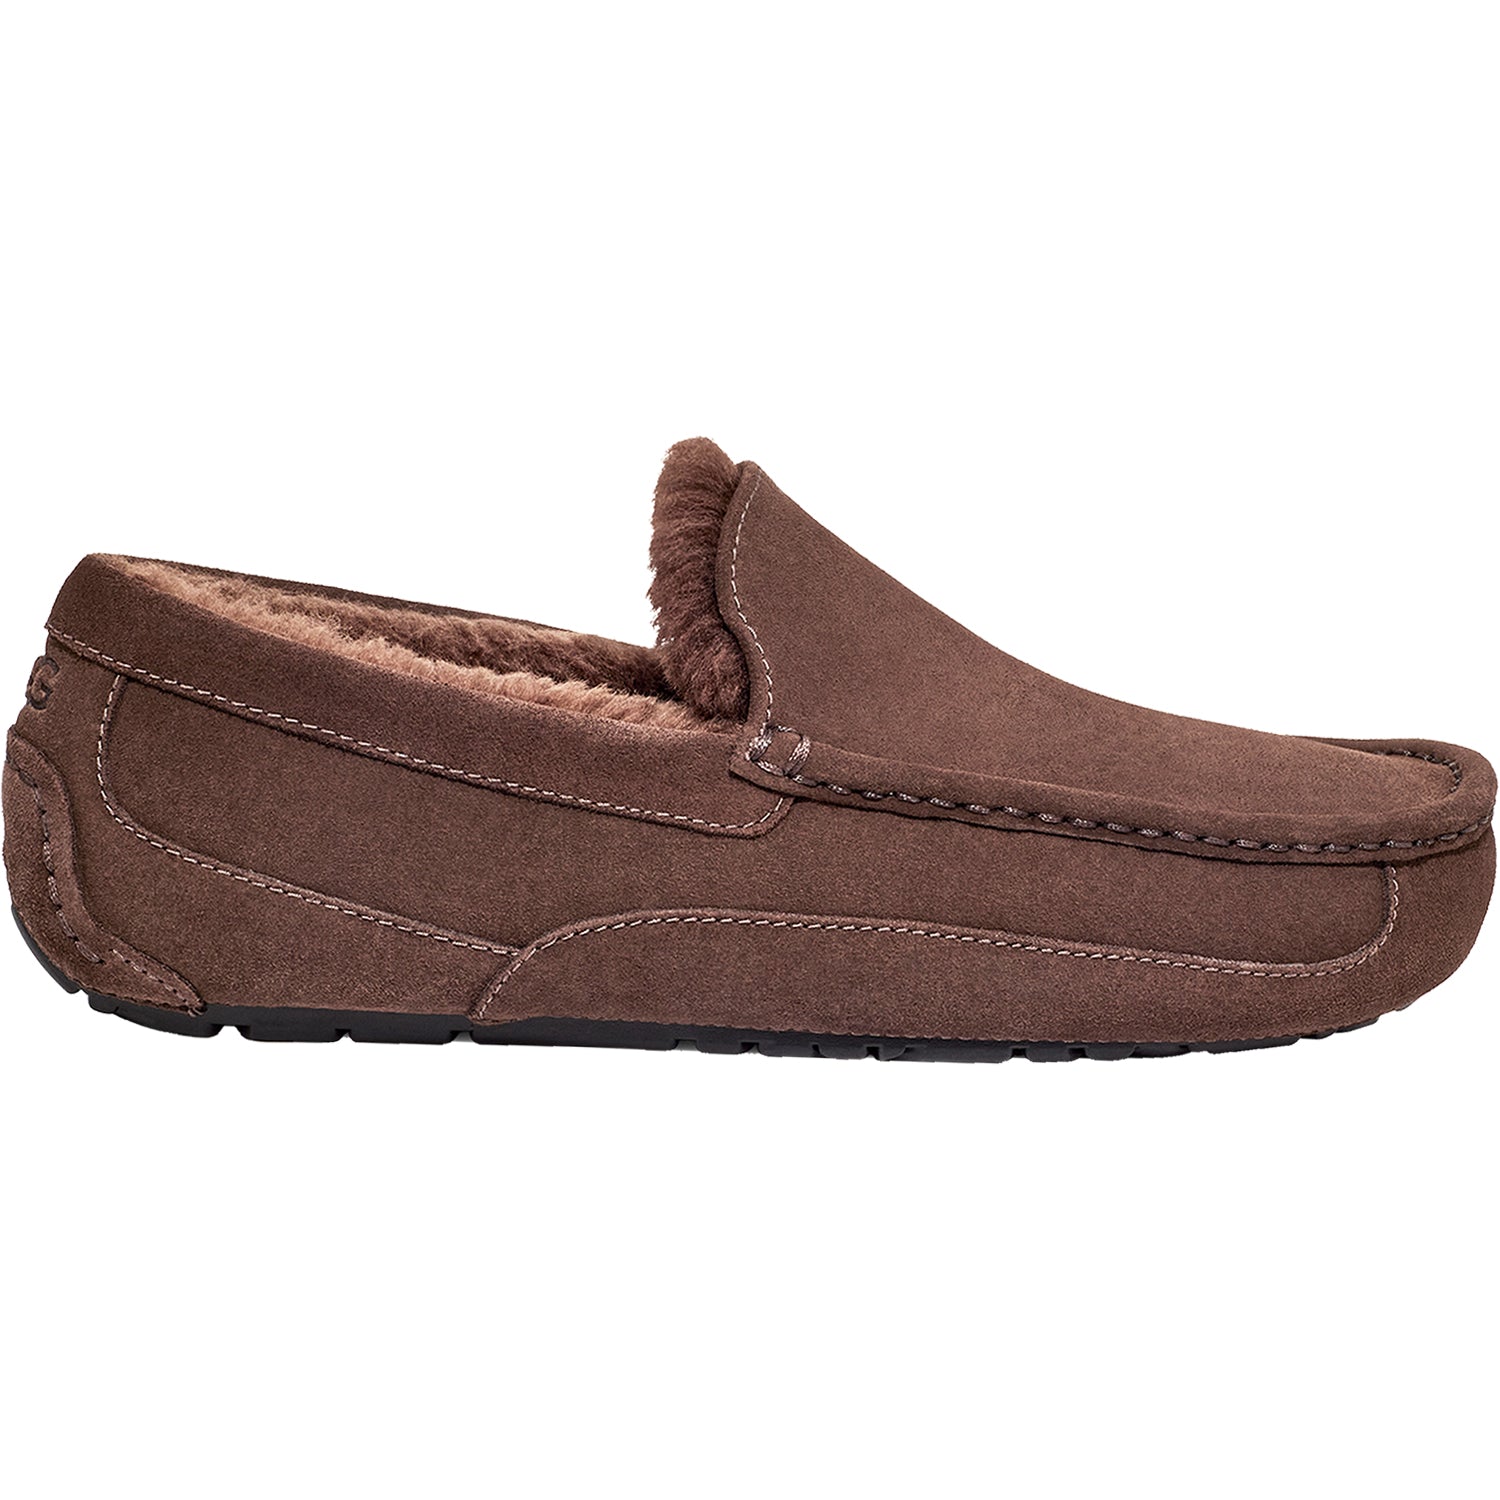 Men's UGG Ascot Dusted Cocoa Suede – Footwear etc.